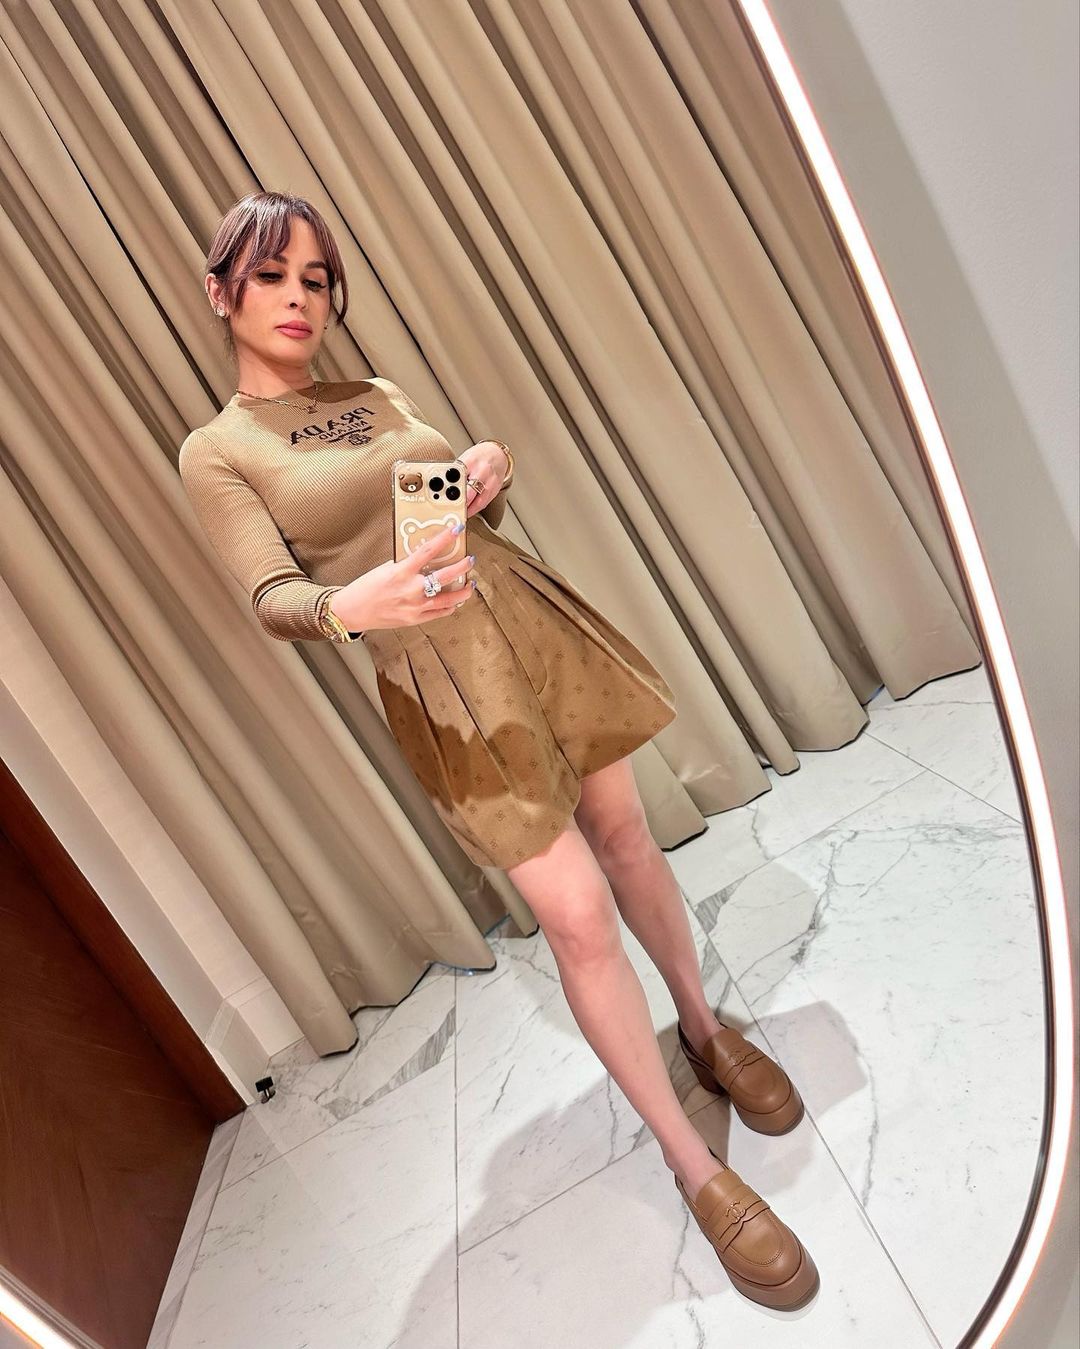 Jinkee Pacquiao , her very expensive and lovely outfit, she's The